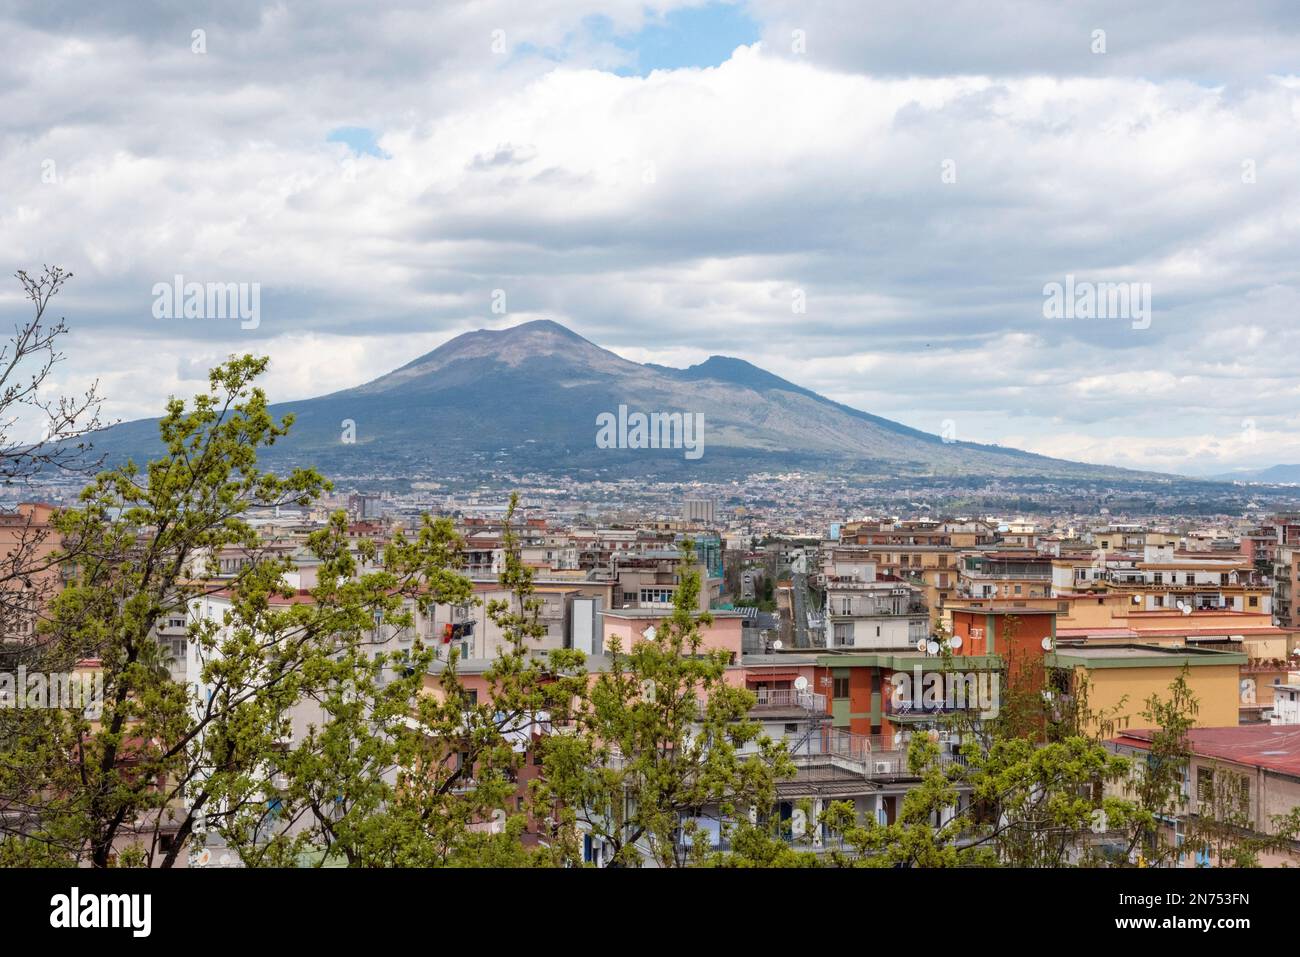 Panoramic view of mount Vesuvius, the cities of Stabia and Pompeii in front, Southern Italy Stock Photo